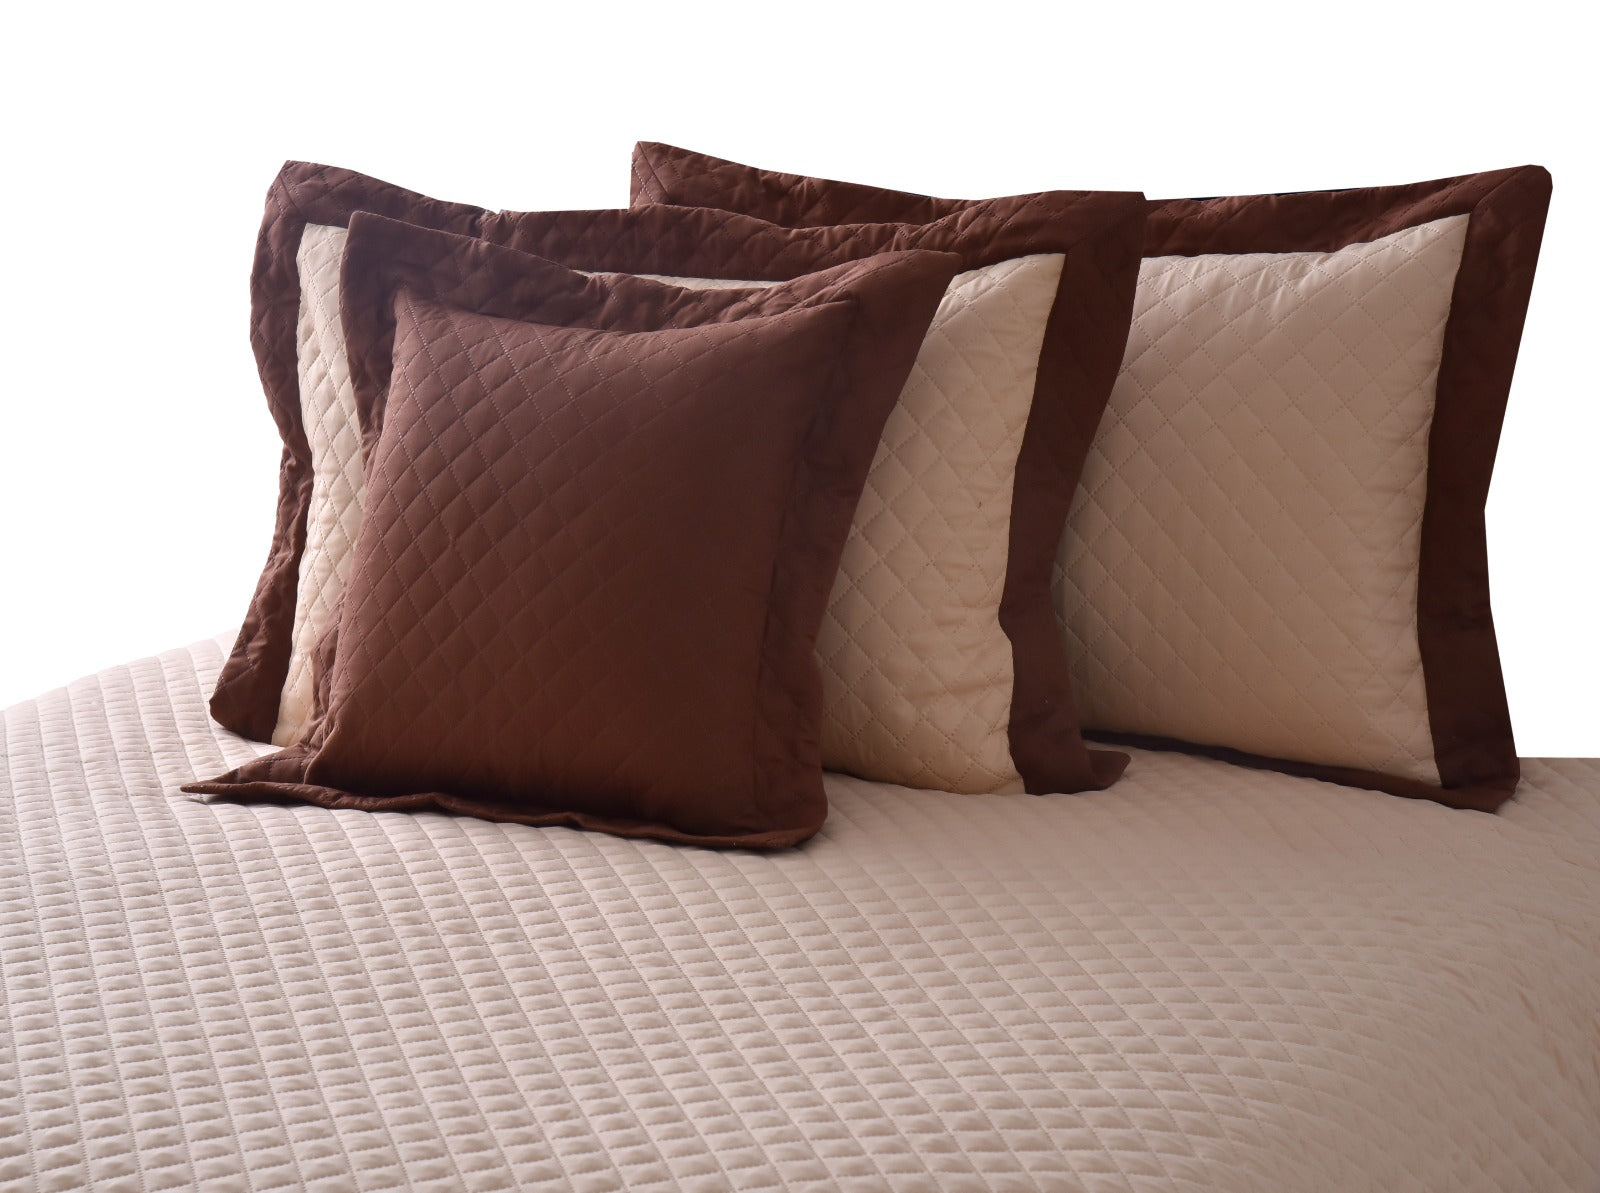 4 PCs Ultrasonic Quilted Luxury Bed Spread Set-Beige Over Brown Apricot